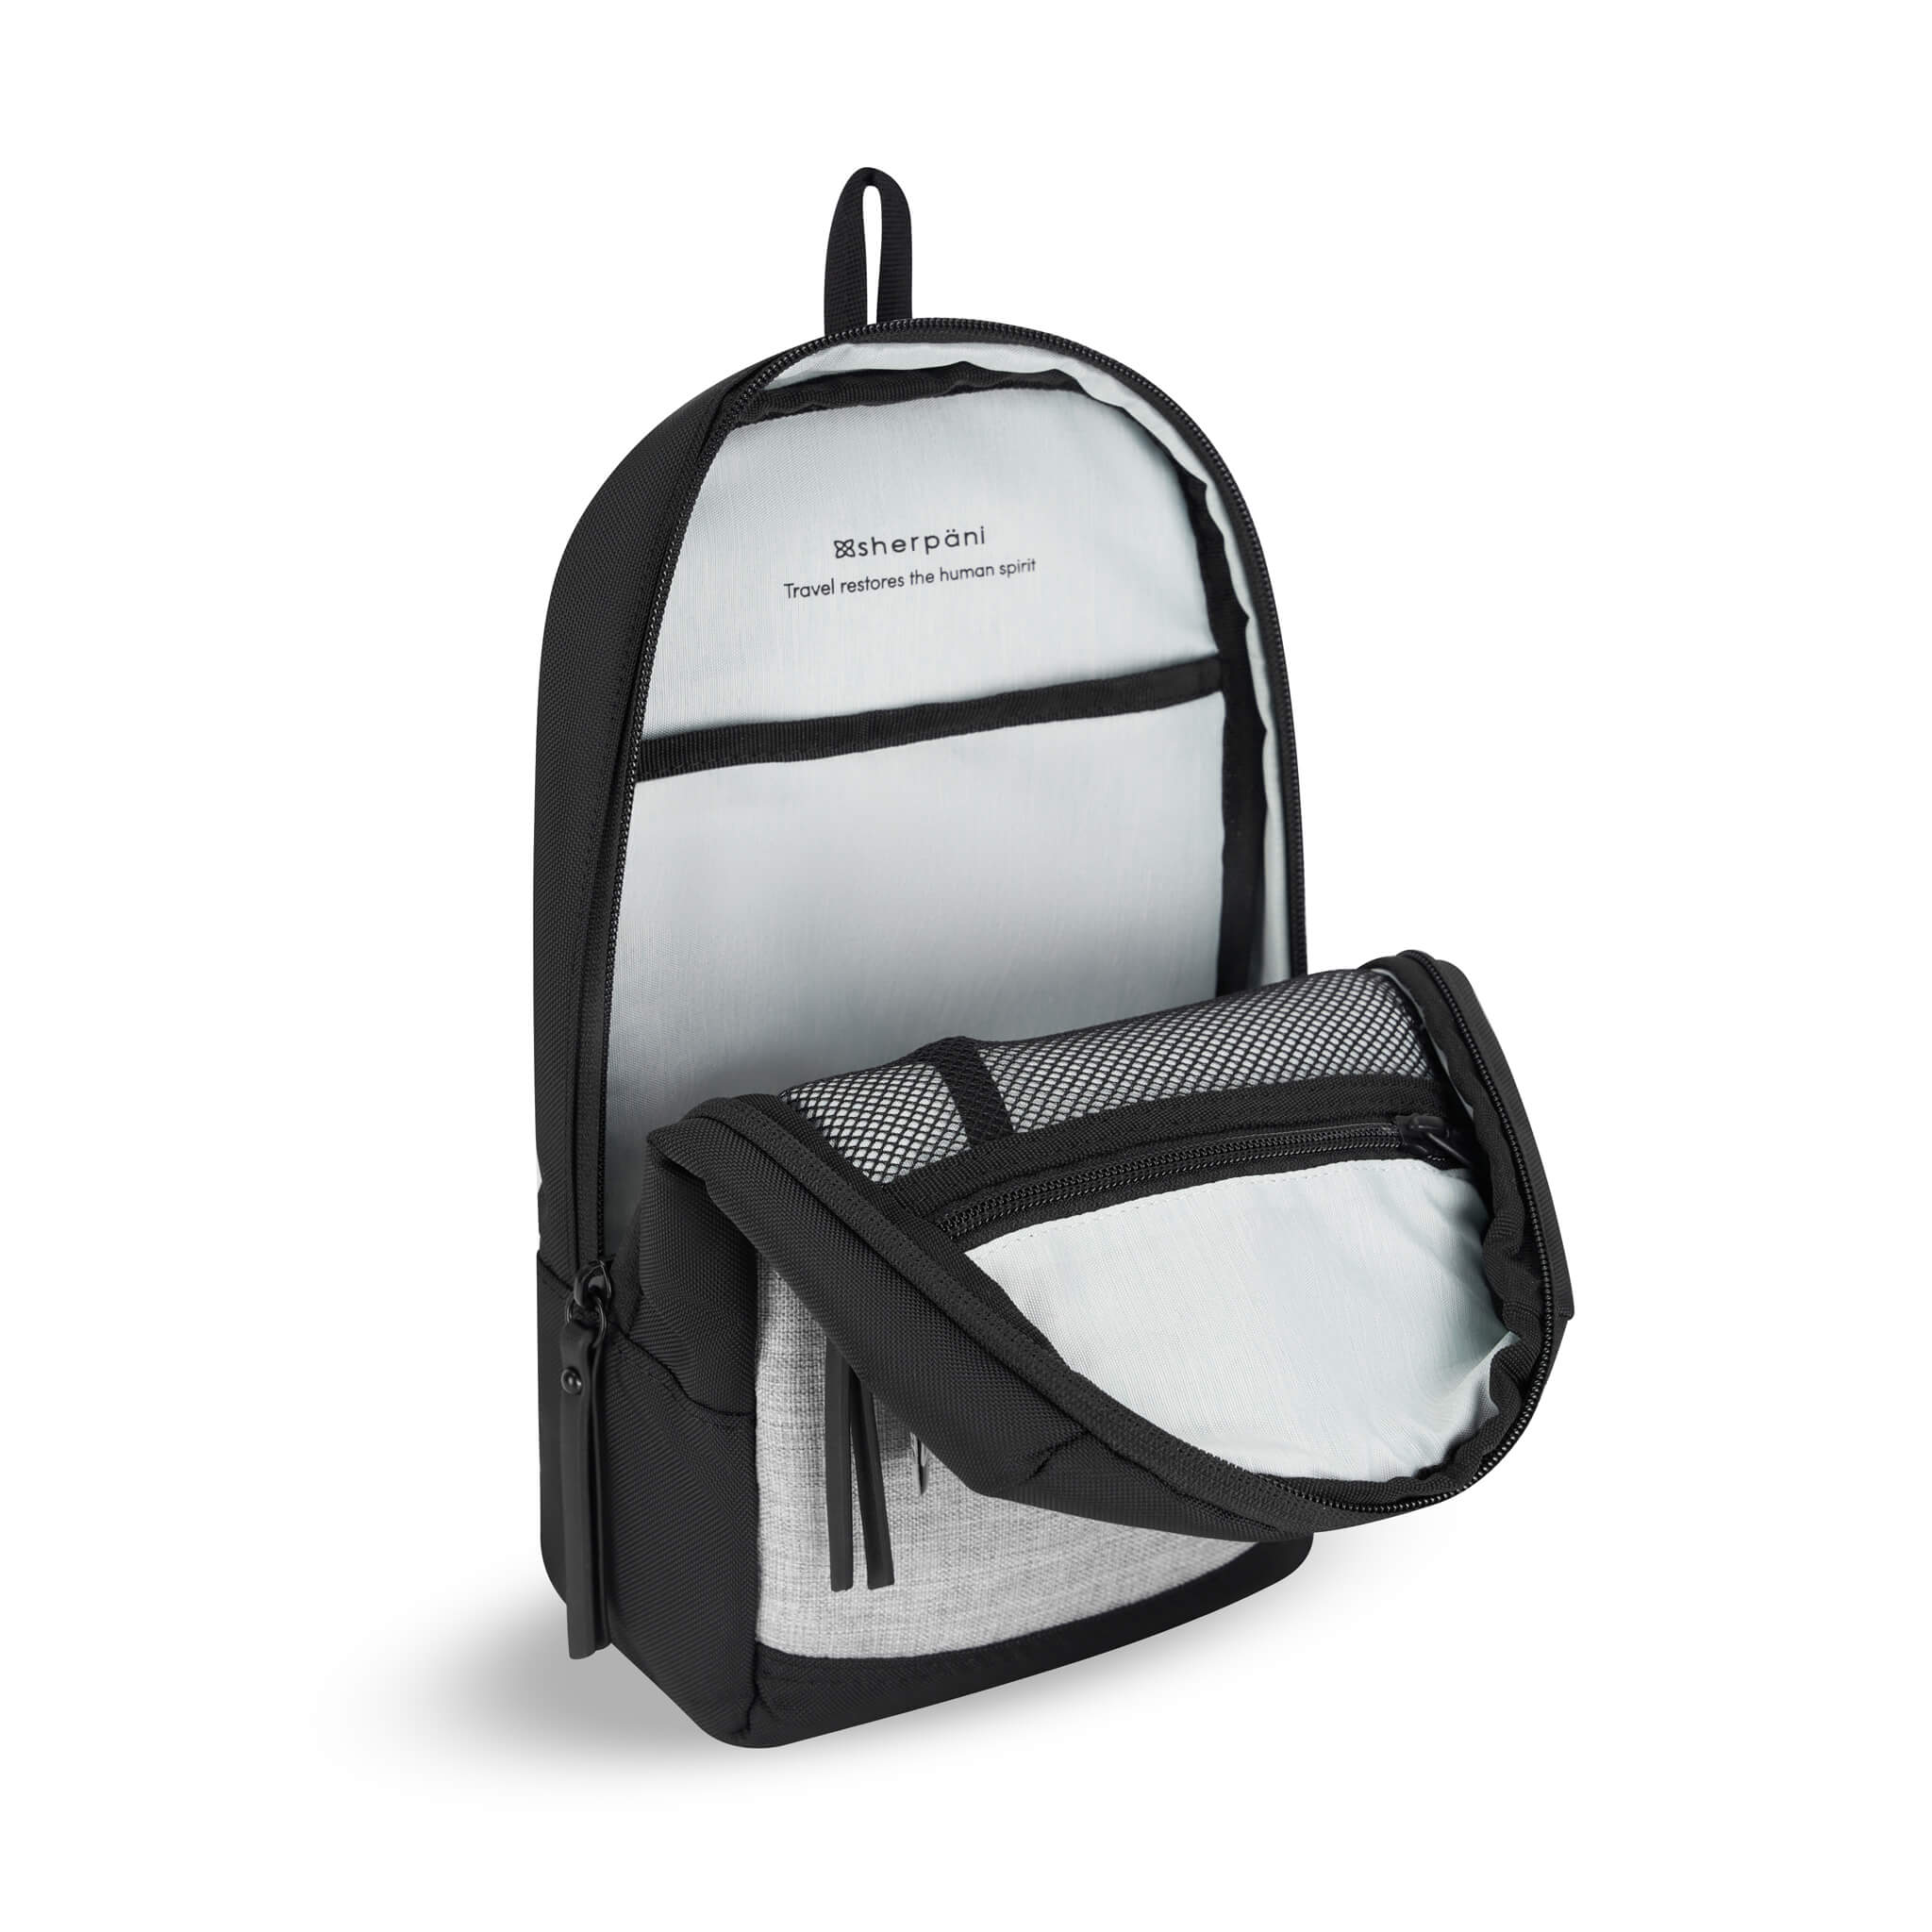 Inside view of Sherpani travel sling bag, the Metro. "Travel restores the human spirit" is printed on a light-colored interior. Features include zipper pockets made from see-through mesh for visibility. 